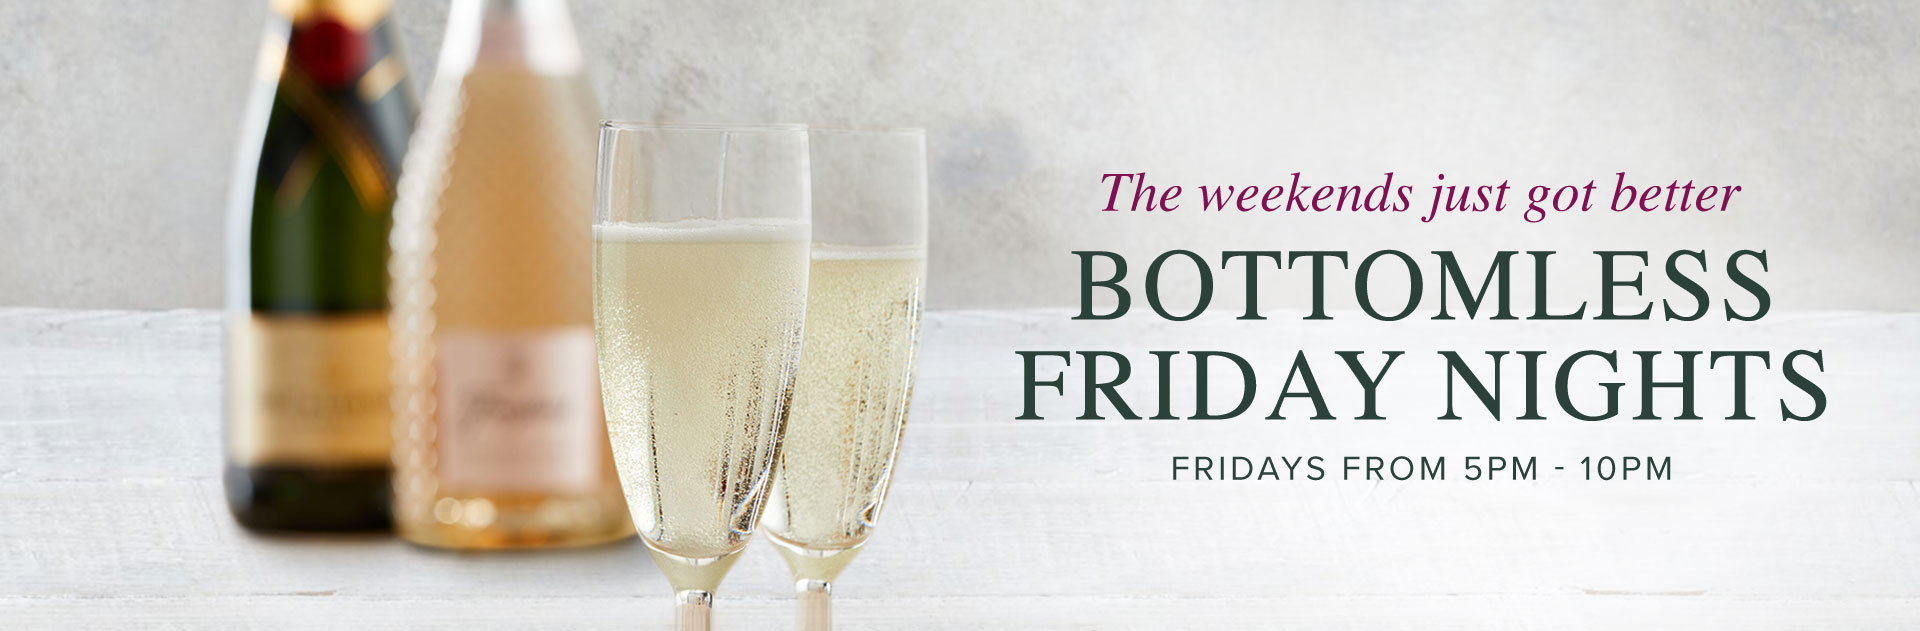 Bottomless Friday at The Rayleigh Lodge